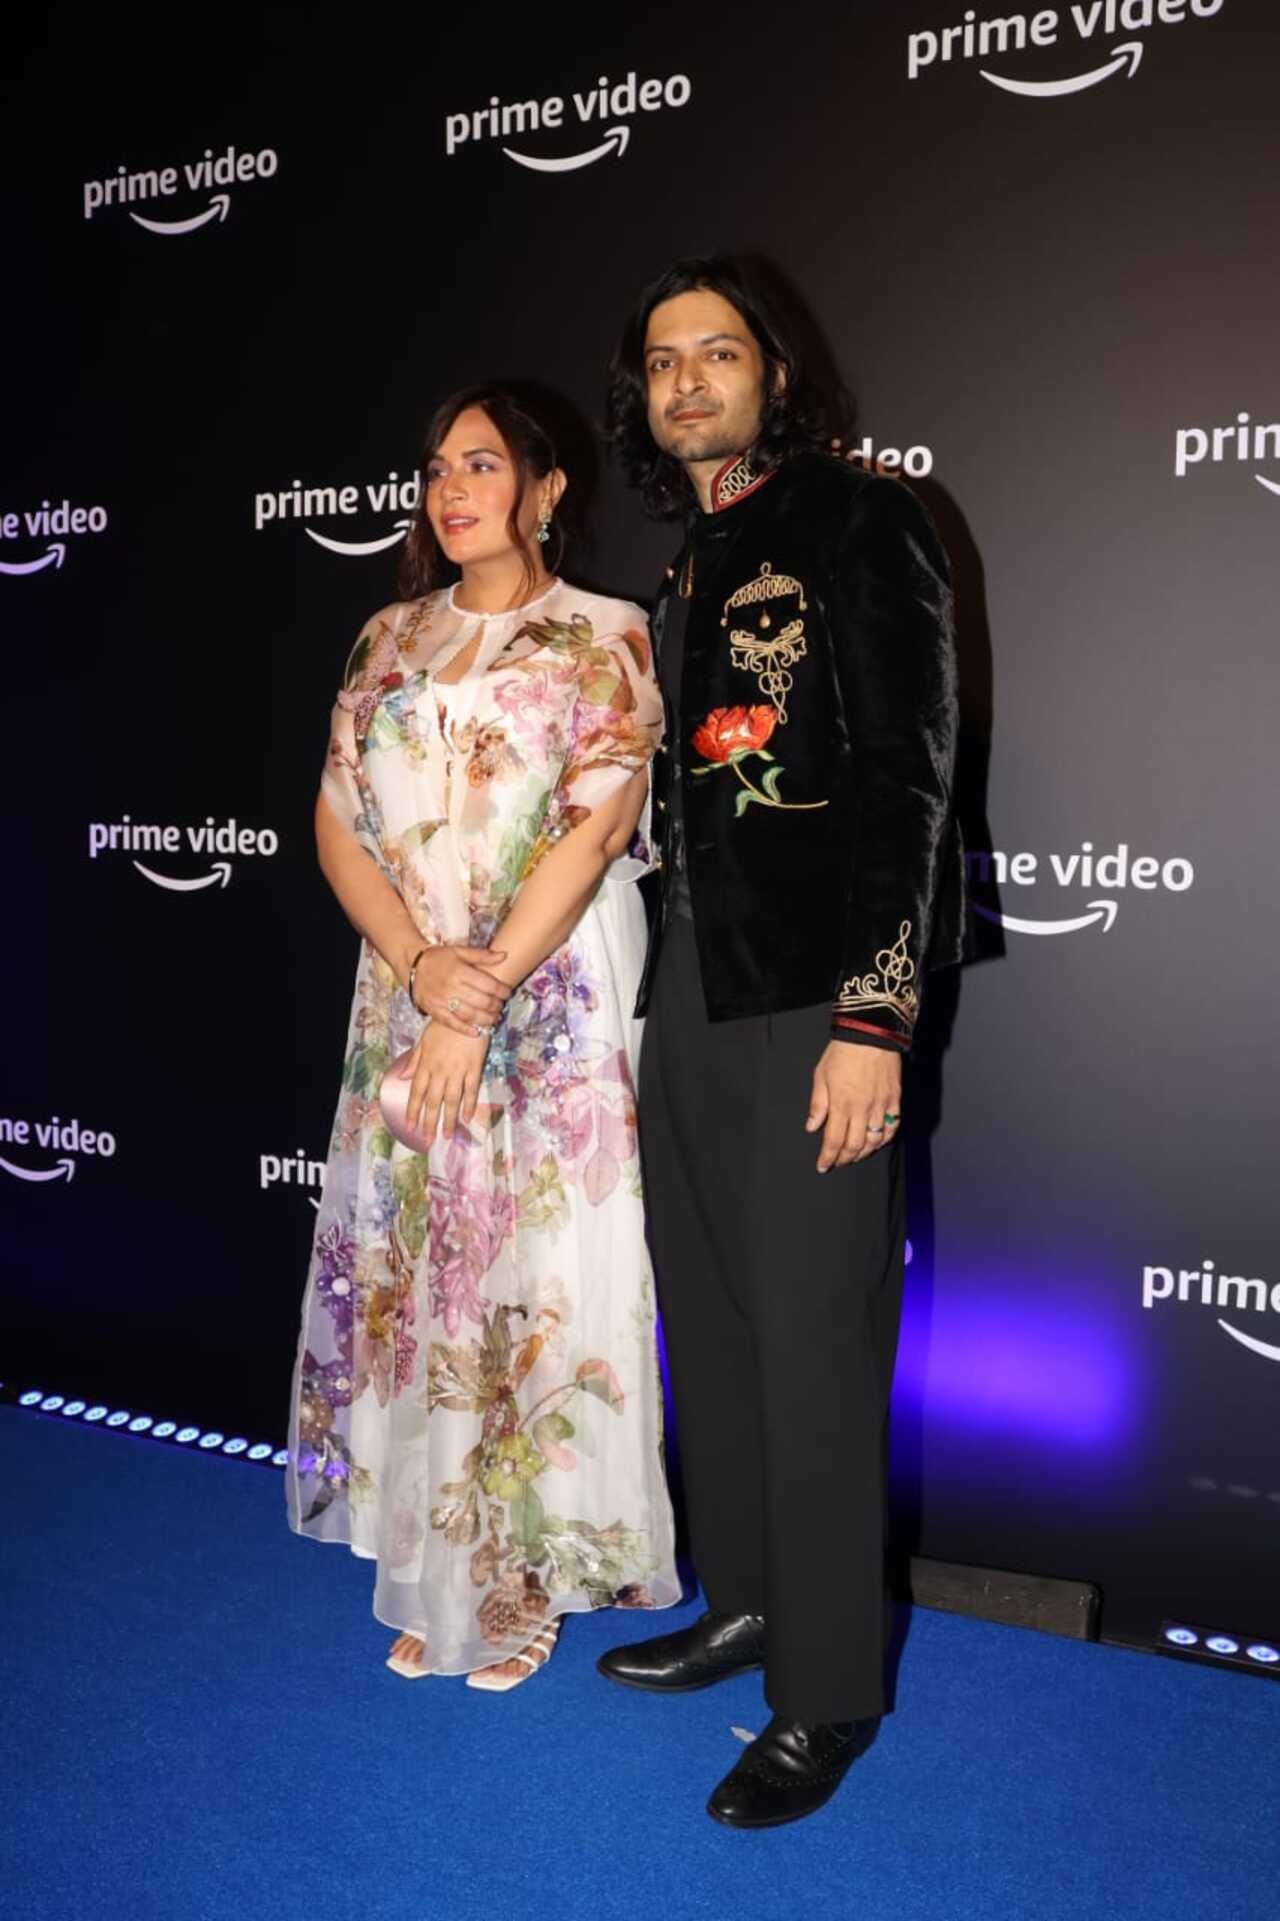 Mom-to-be Richa Chadha wore a floral outfit while Ali Fazal, who will be seen in 'Mirzapur 3' opted for a black ensemble. 